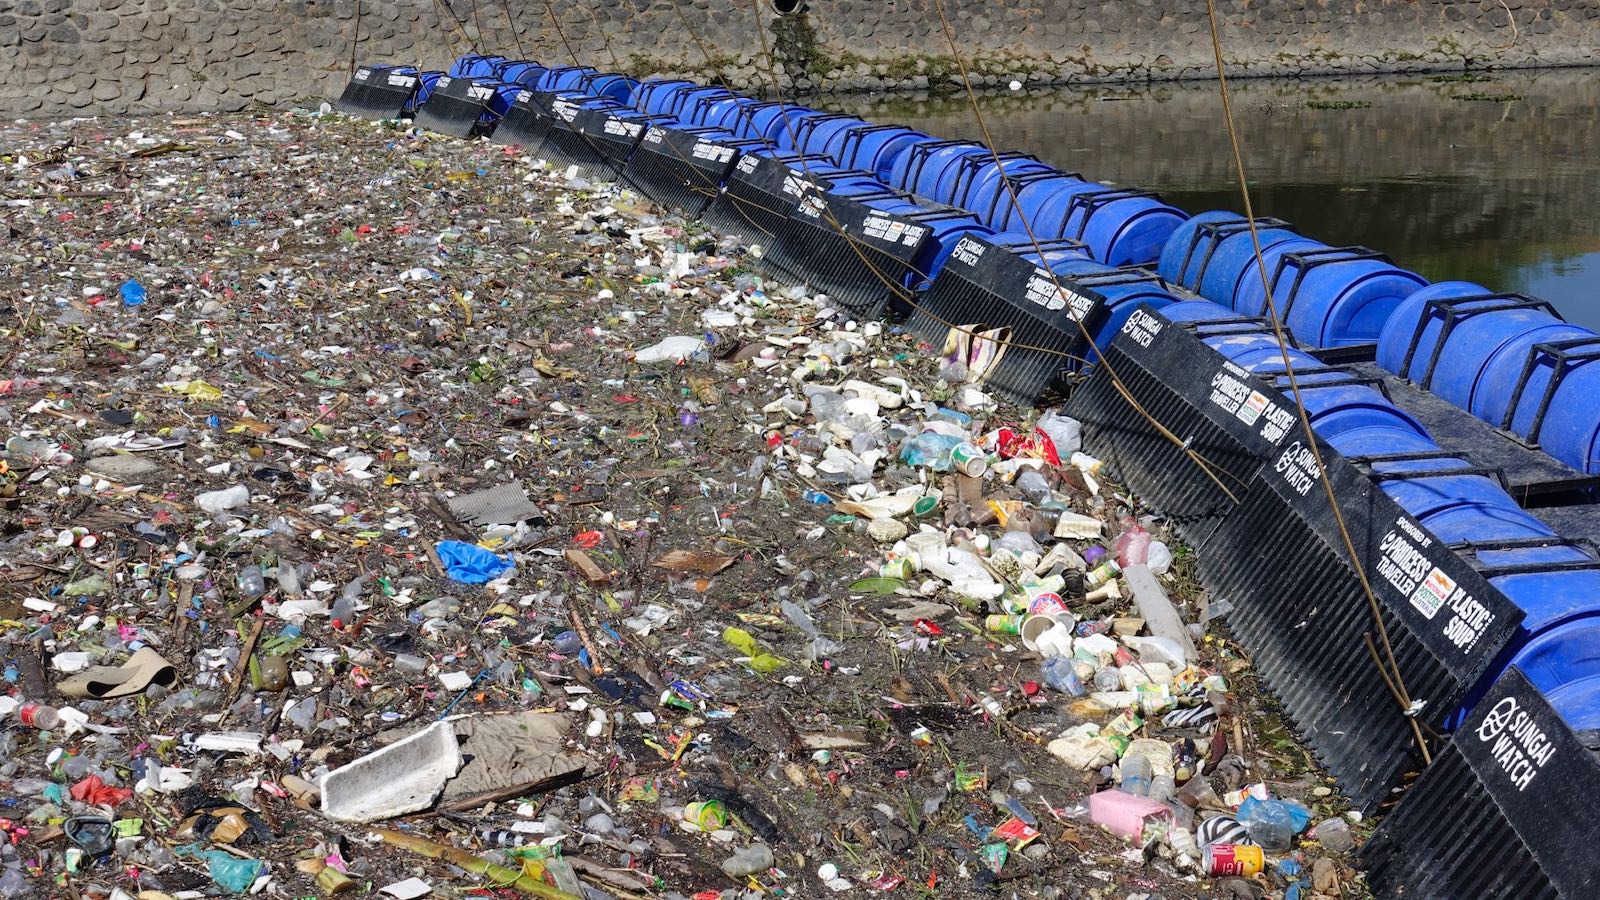 They already installed more than 100 barriers, collecting more than 345,000kg of plastic.